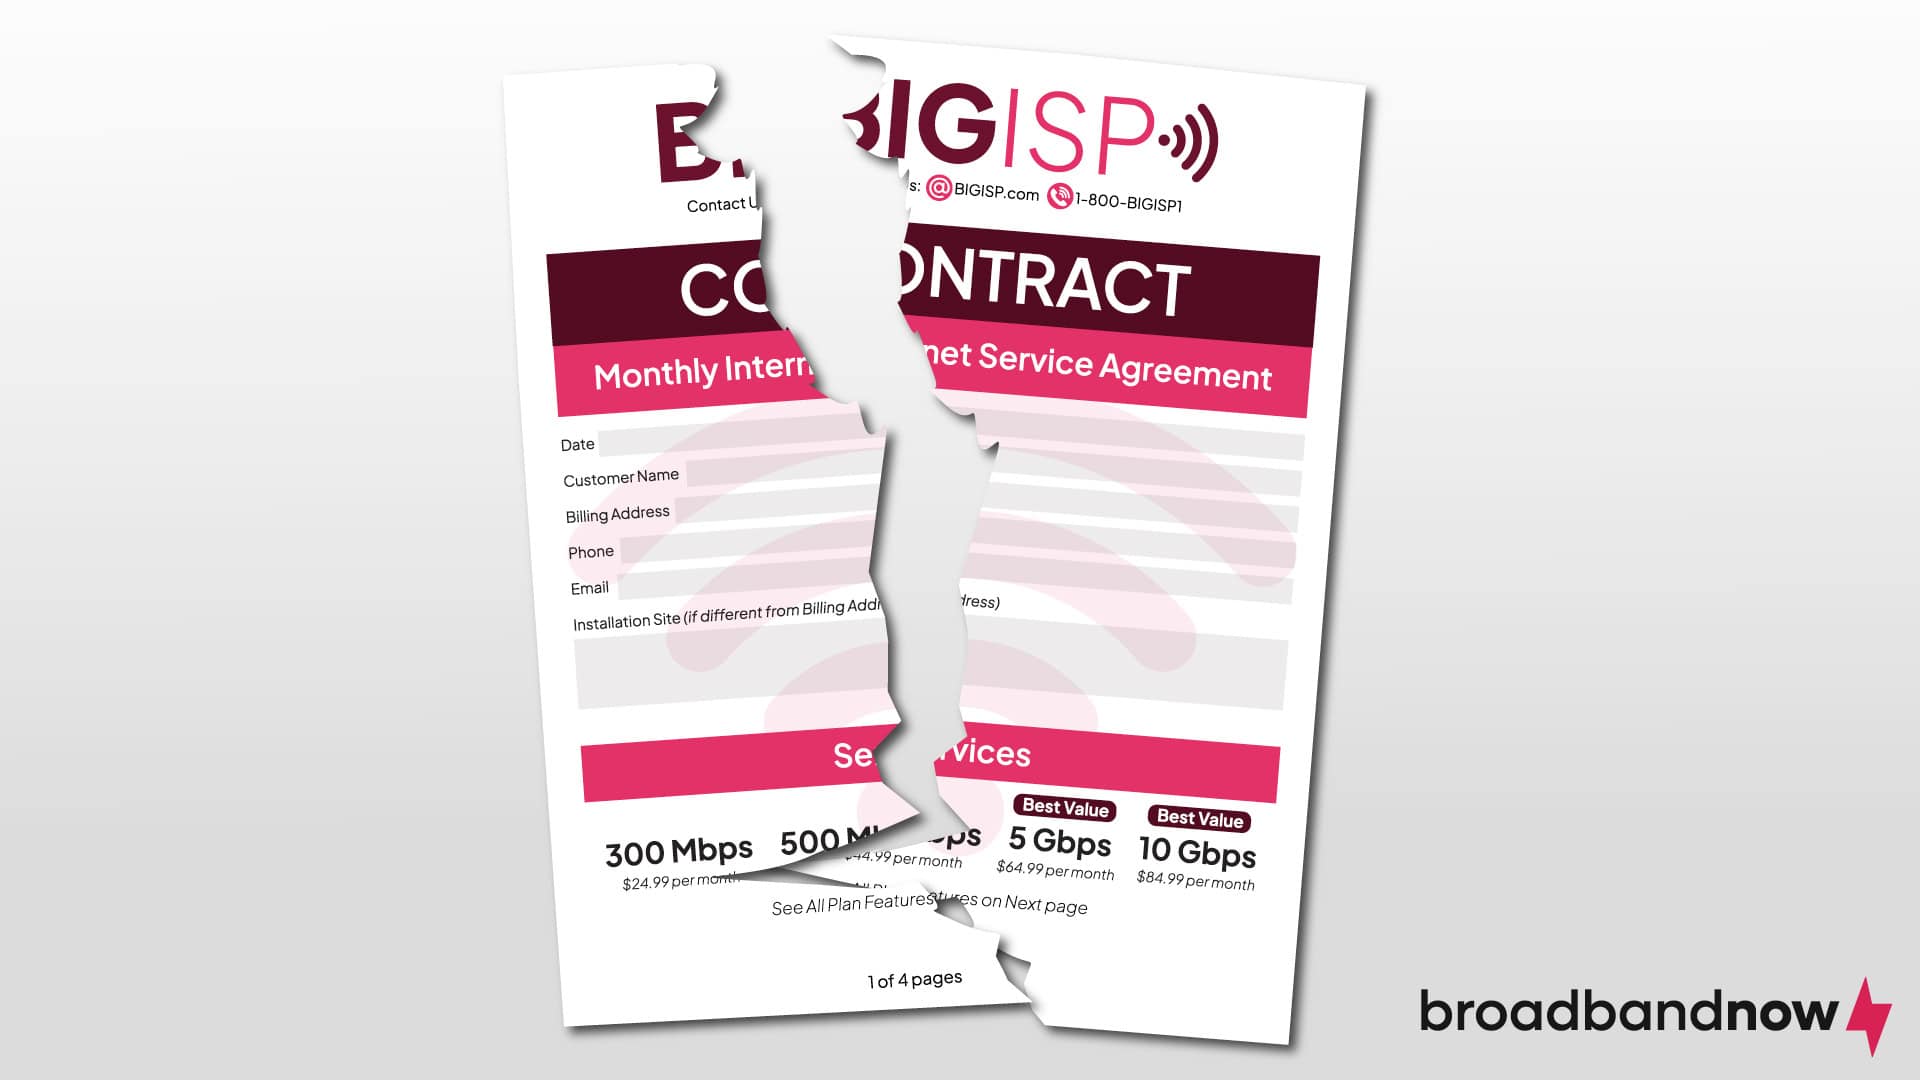 A graphic of a contract from Big ISP that has been torn in half.